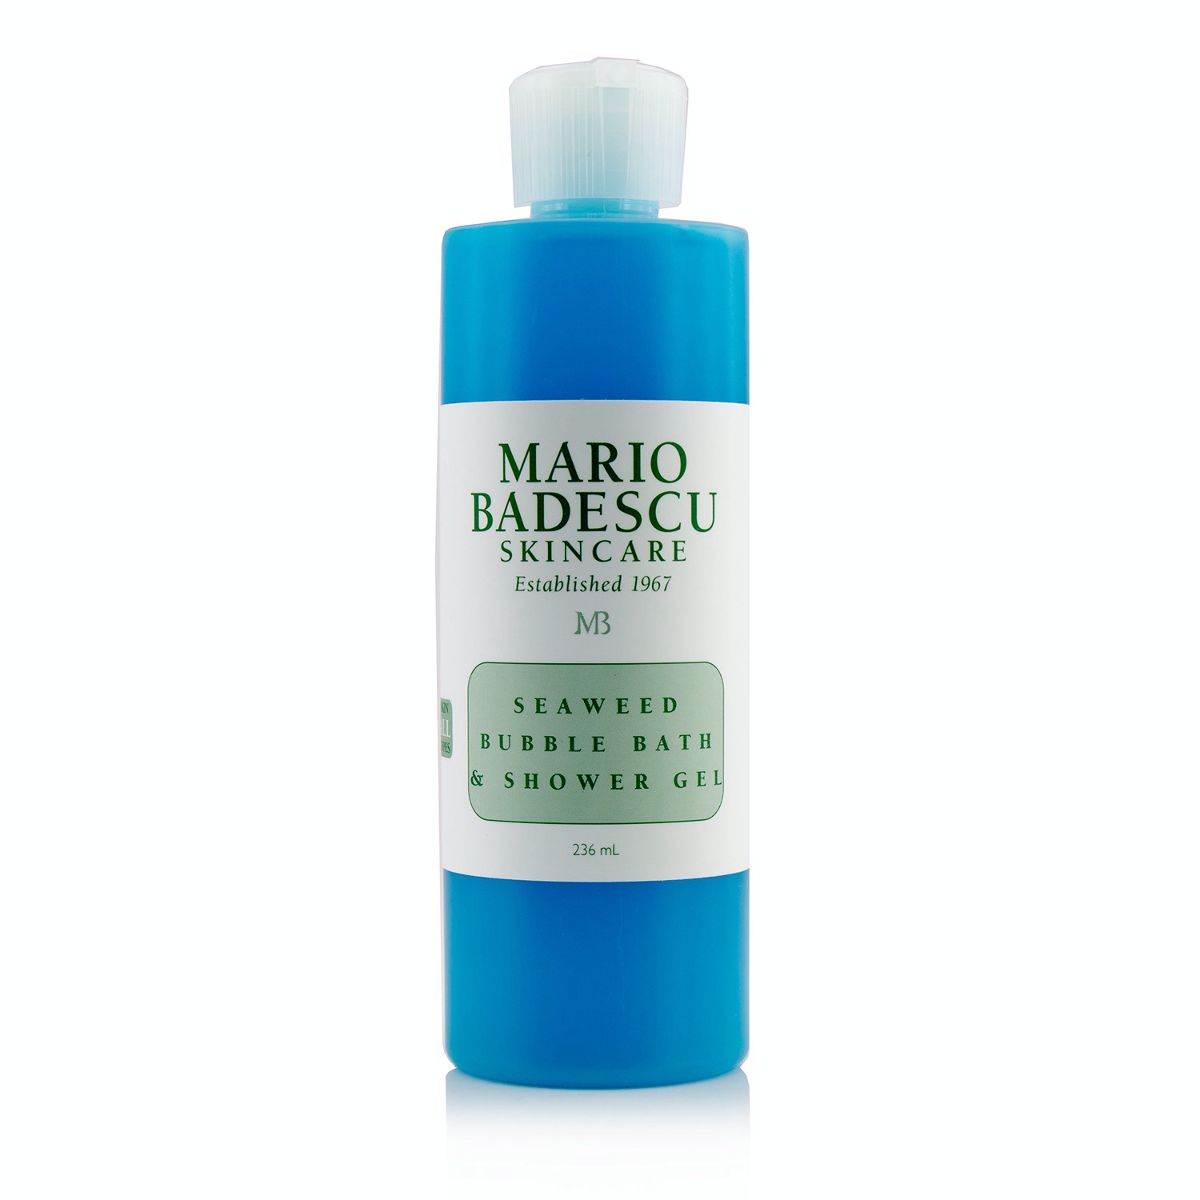 Seaweed Bubble Bath  Shower Gel - For All Skin Types Mario Badescu Image